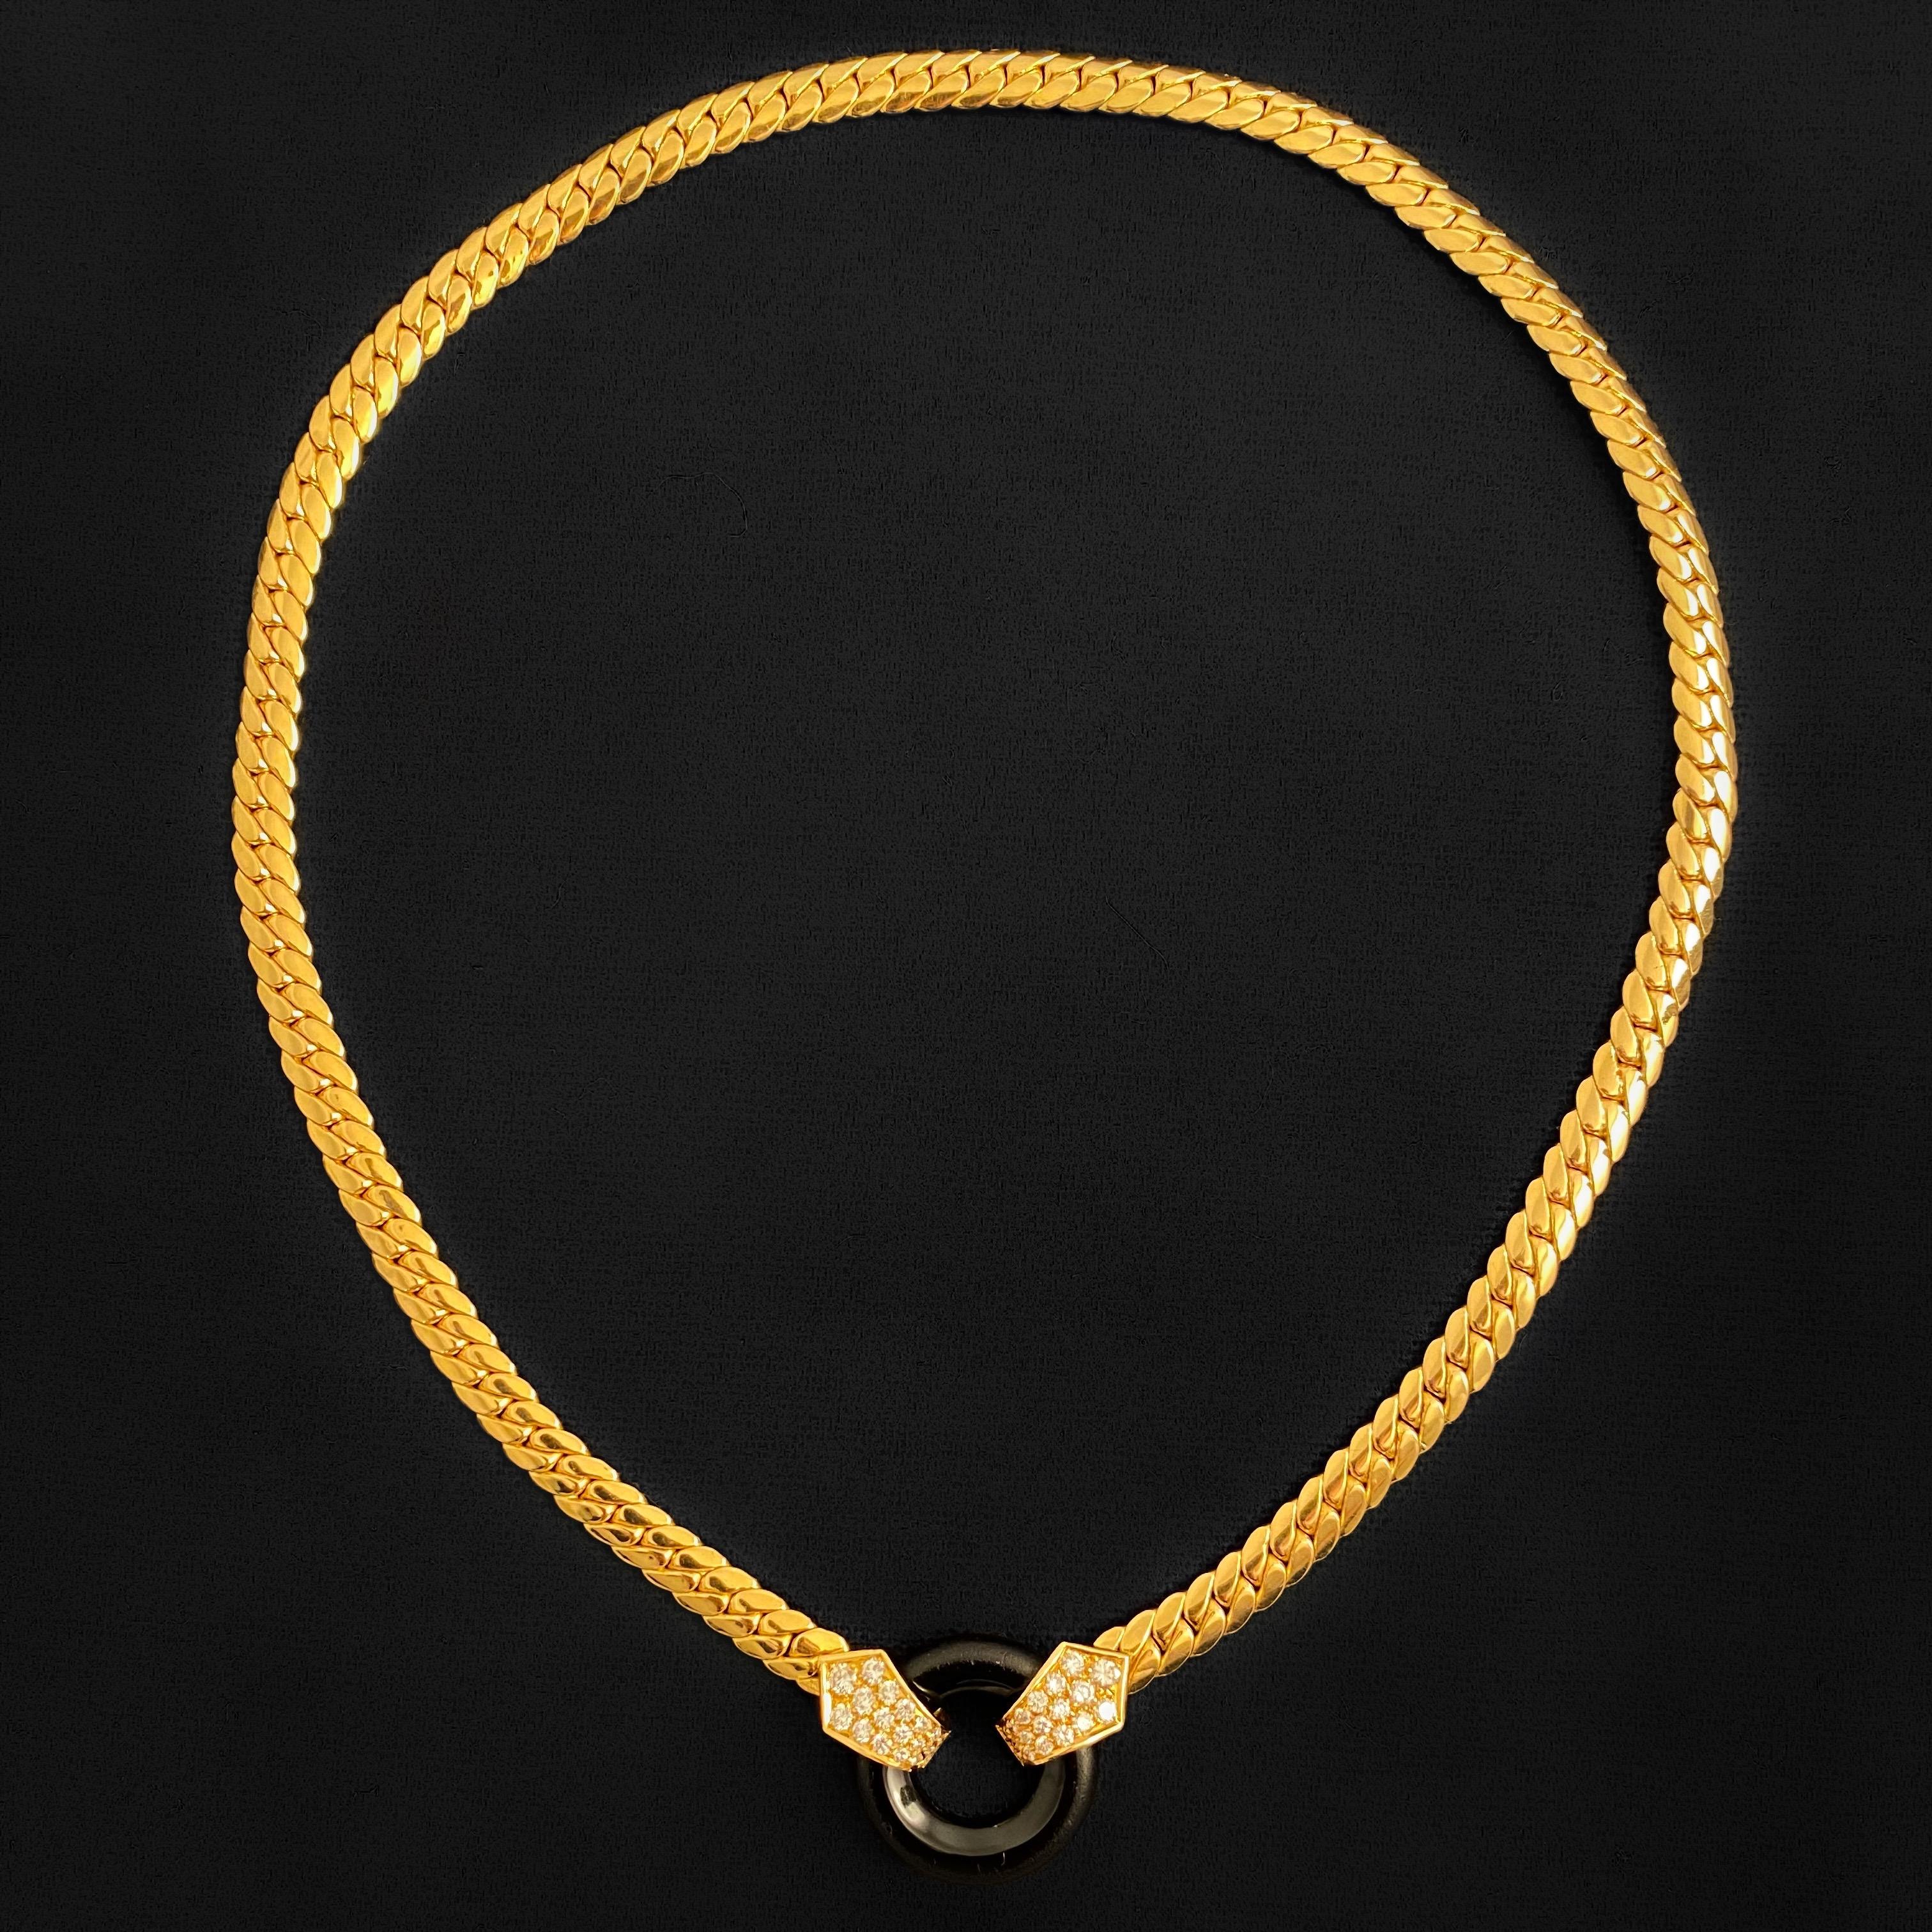 VCA Van Cleef & Arpels Vintage Onyx and Diamond Necklace in 18 Karat Yellow Gold, France, 1980s (circa 1988). The articulated flat curb link chain in polished yellow gold leads to shield shape terminals on both ends, each of them pave-set with round